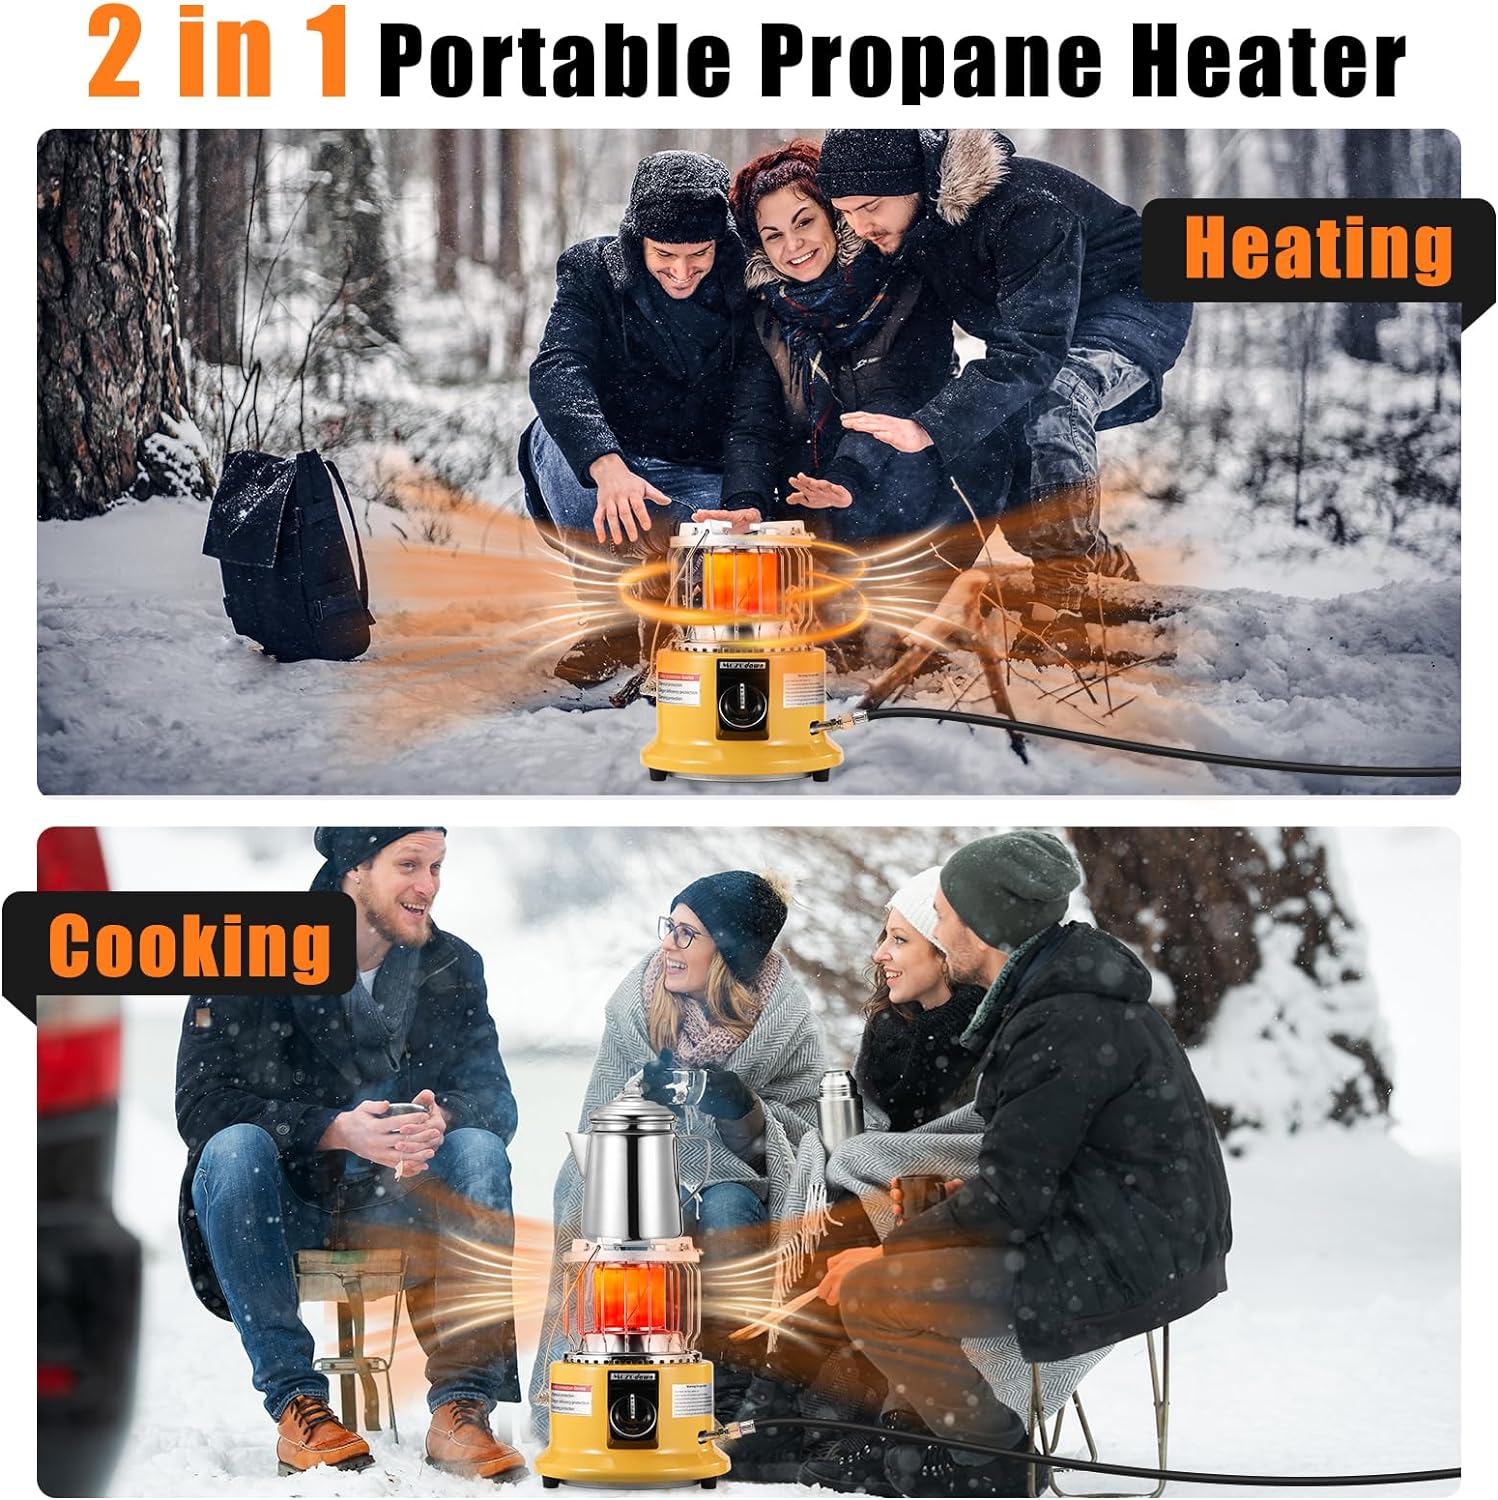 MOZODAWN 2 in 1 Propane Heater  Stove, 13000 BTU Portable Propane Heater Indoor with Handle, Outdoor Heater Gas Stove for Patio, Camping, Tent, Ice Fishing, Hunting - MOZODAWN 2 In 1 Propane Heater & Stove Review